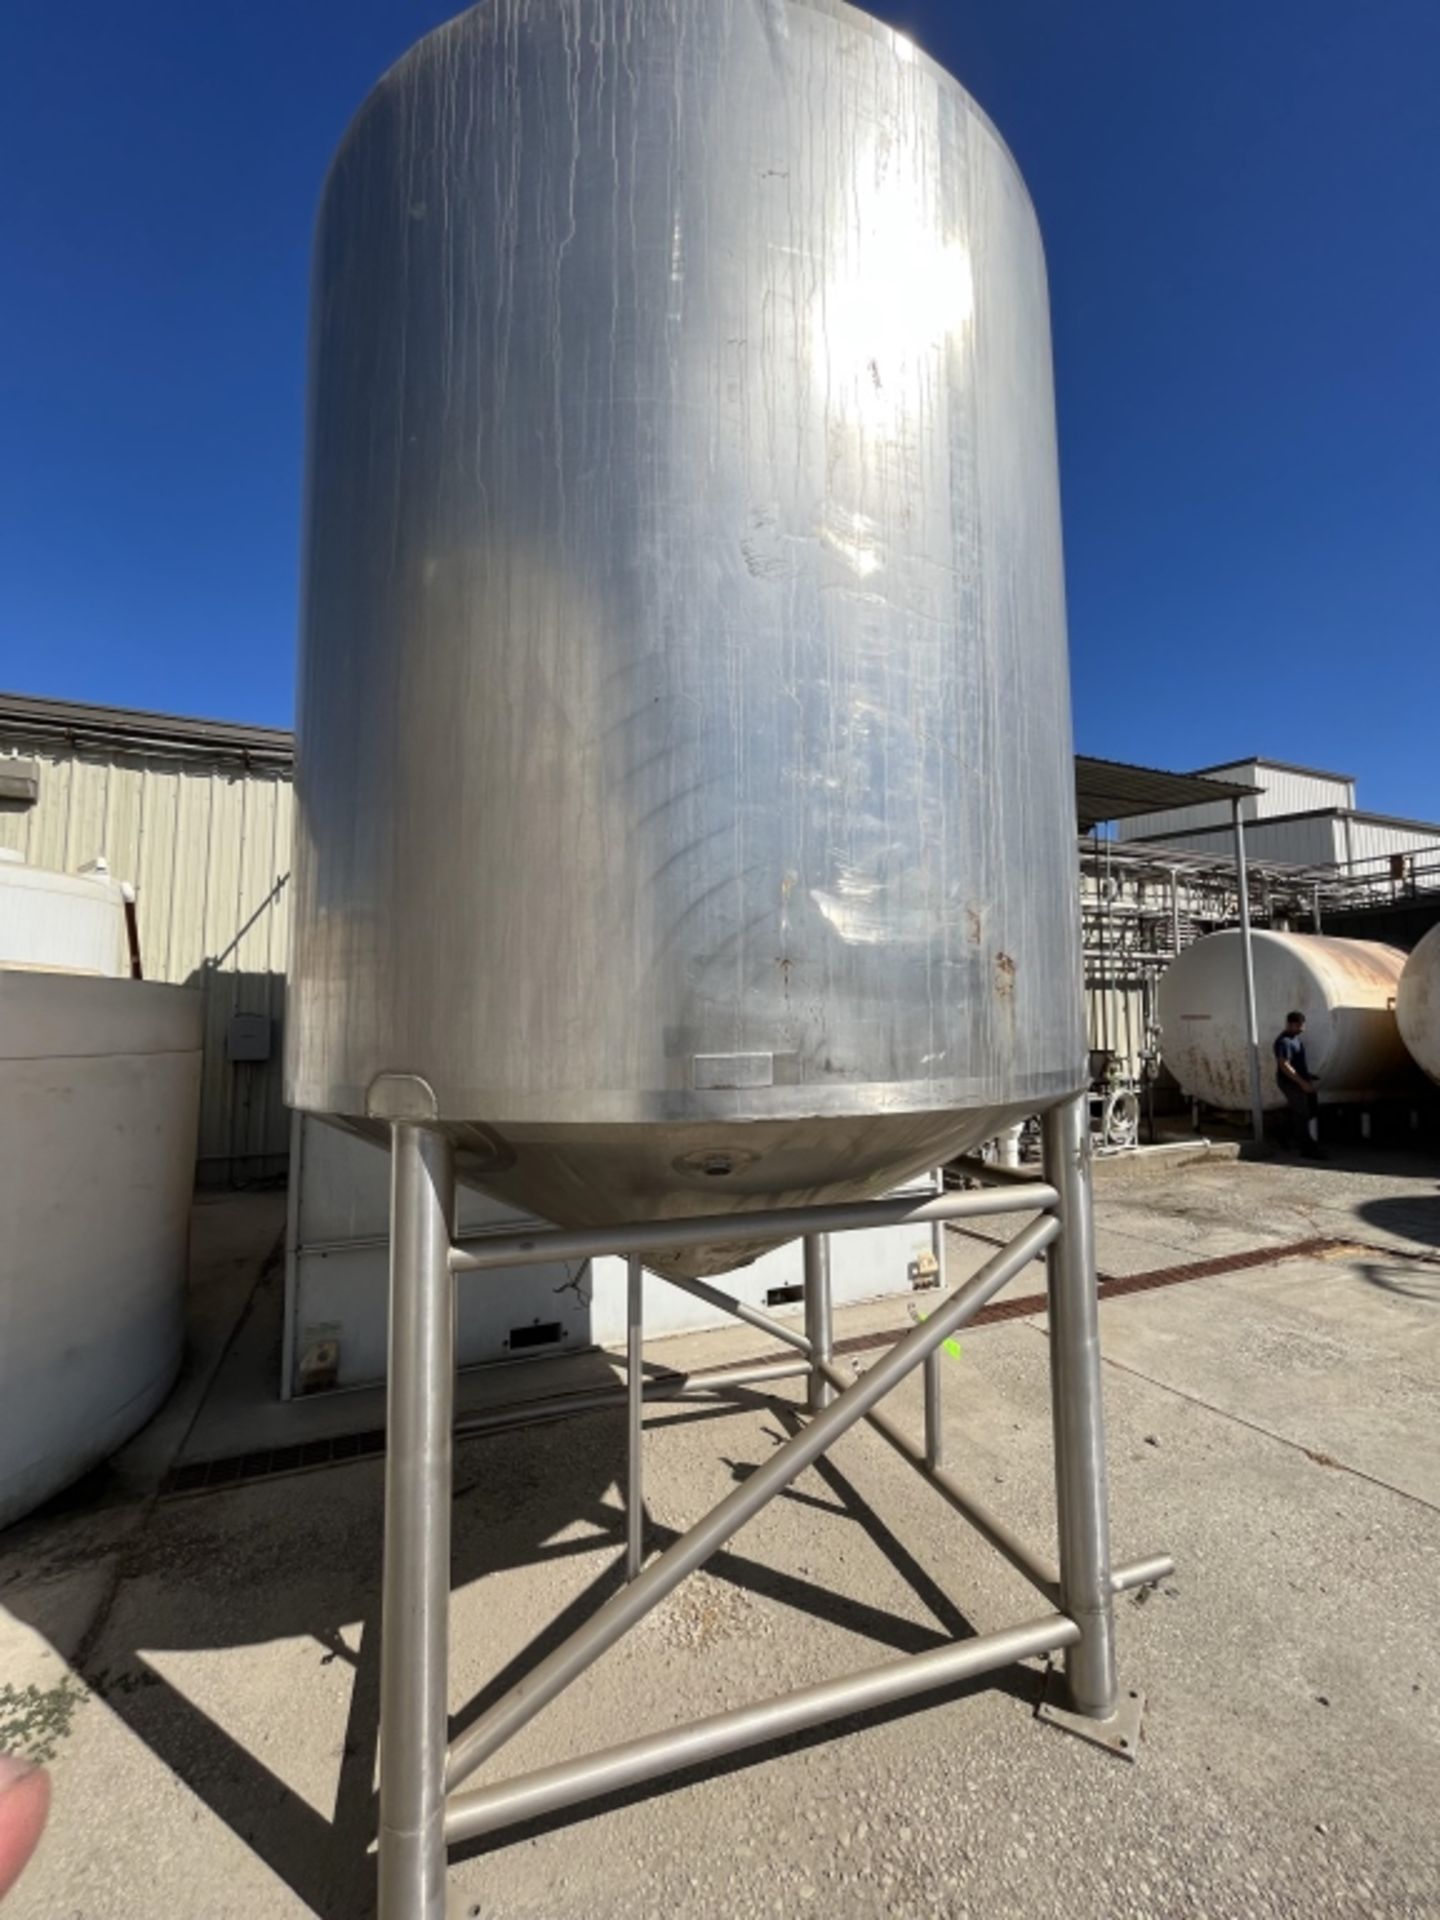 Sani-Fab Jacketed S/S Tank, Tank Dims.: Aprox. 7ft. Tall x 80” Dia., Cone Bottom, Mounted on S/S - Image 2 of 9